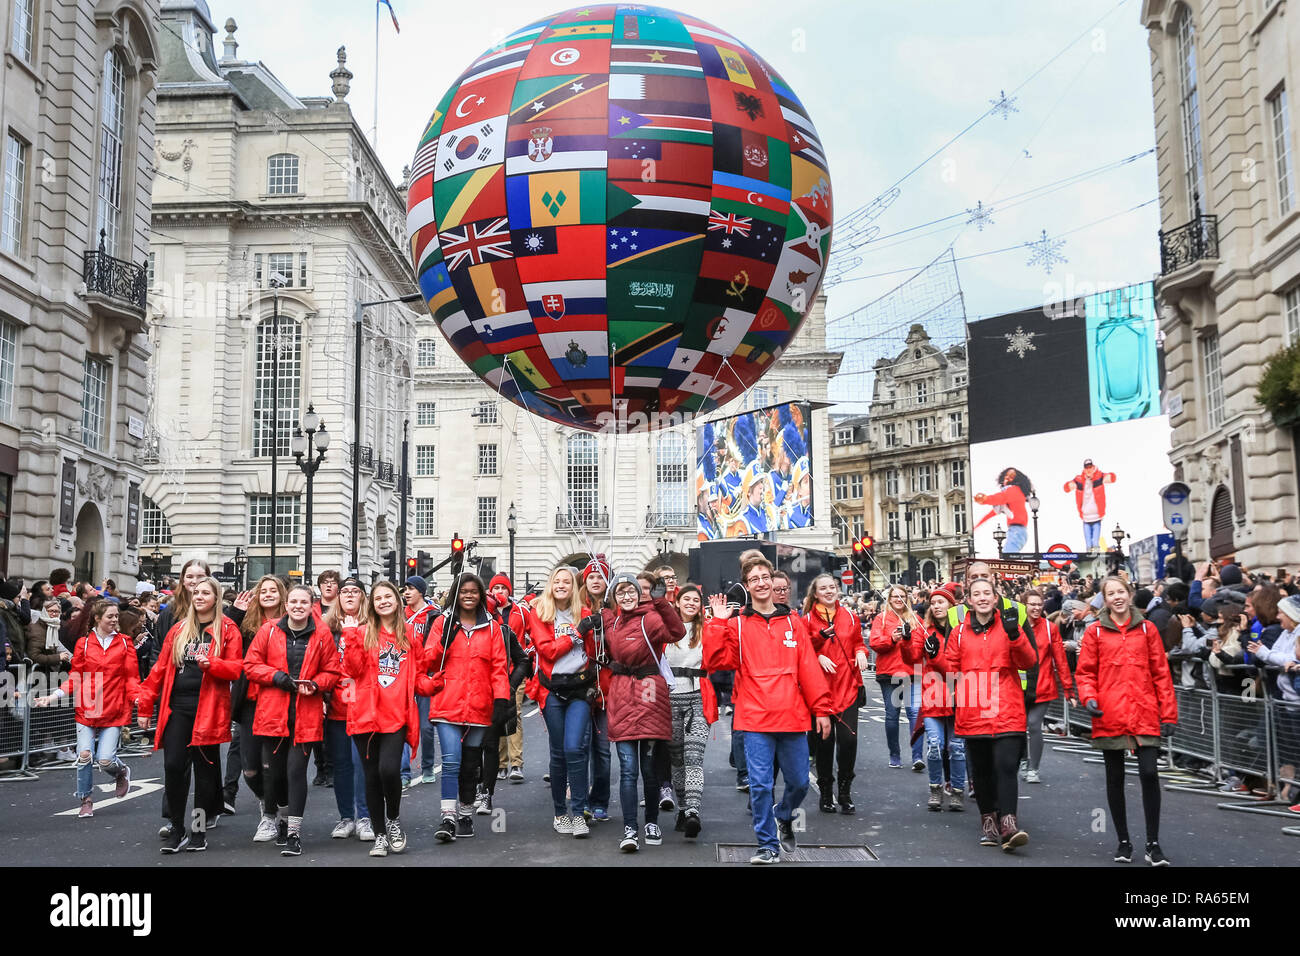 London, UK. 1st Jan 2019. A giant balloon with international flags makes  its way through London. London's New Year's Day Parade 2019, or LNYDP,  features just over 10,000 participants from the USA,